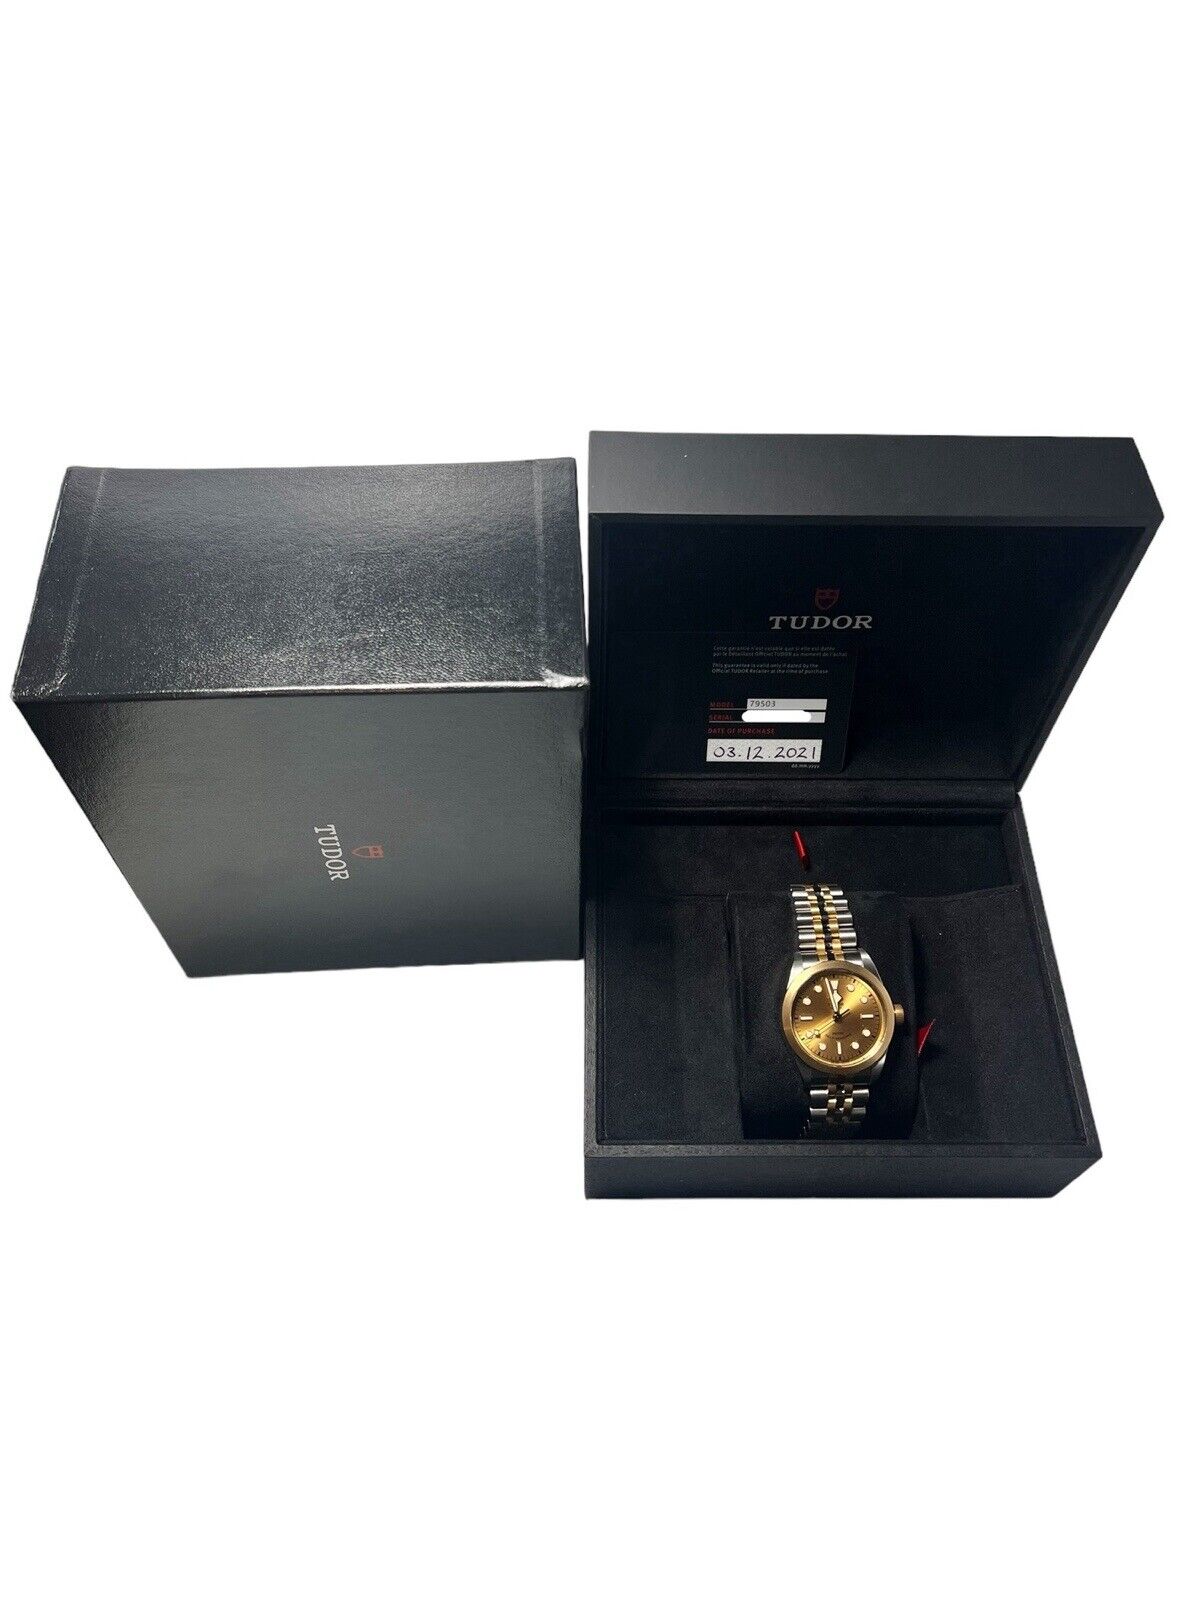 Tudor Black Bay S&G Steel Champagne Dial 36mm Automatic Men’s Watch 79503